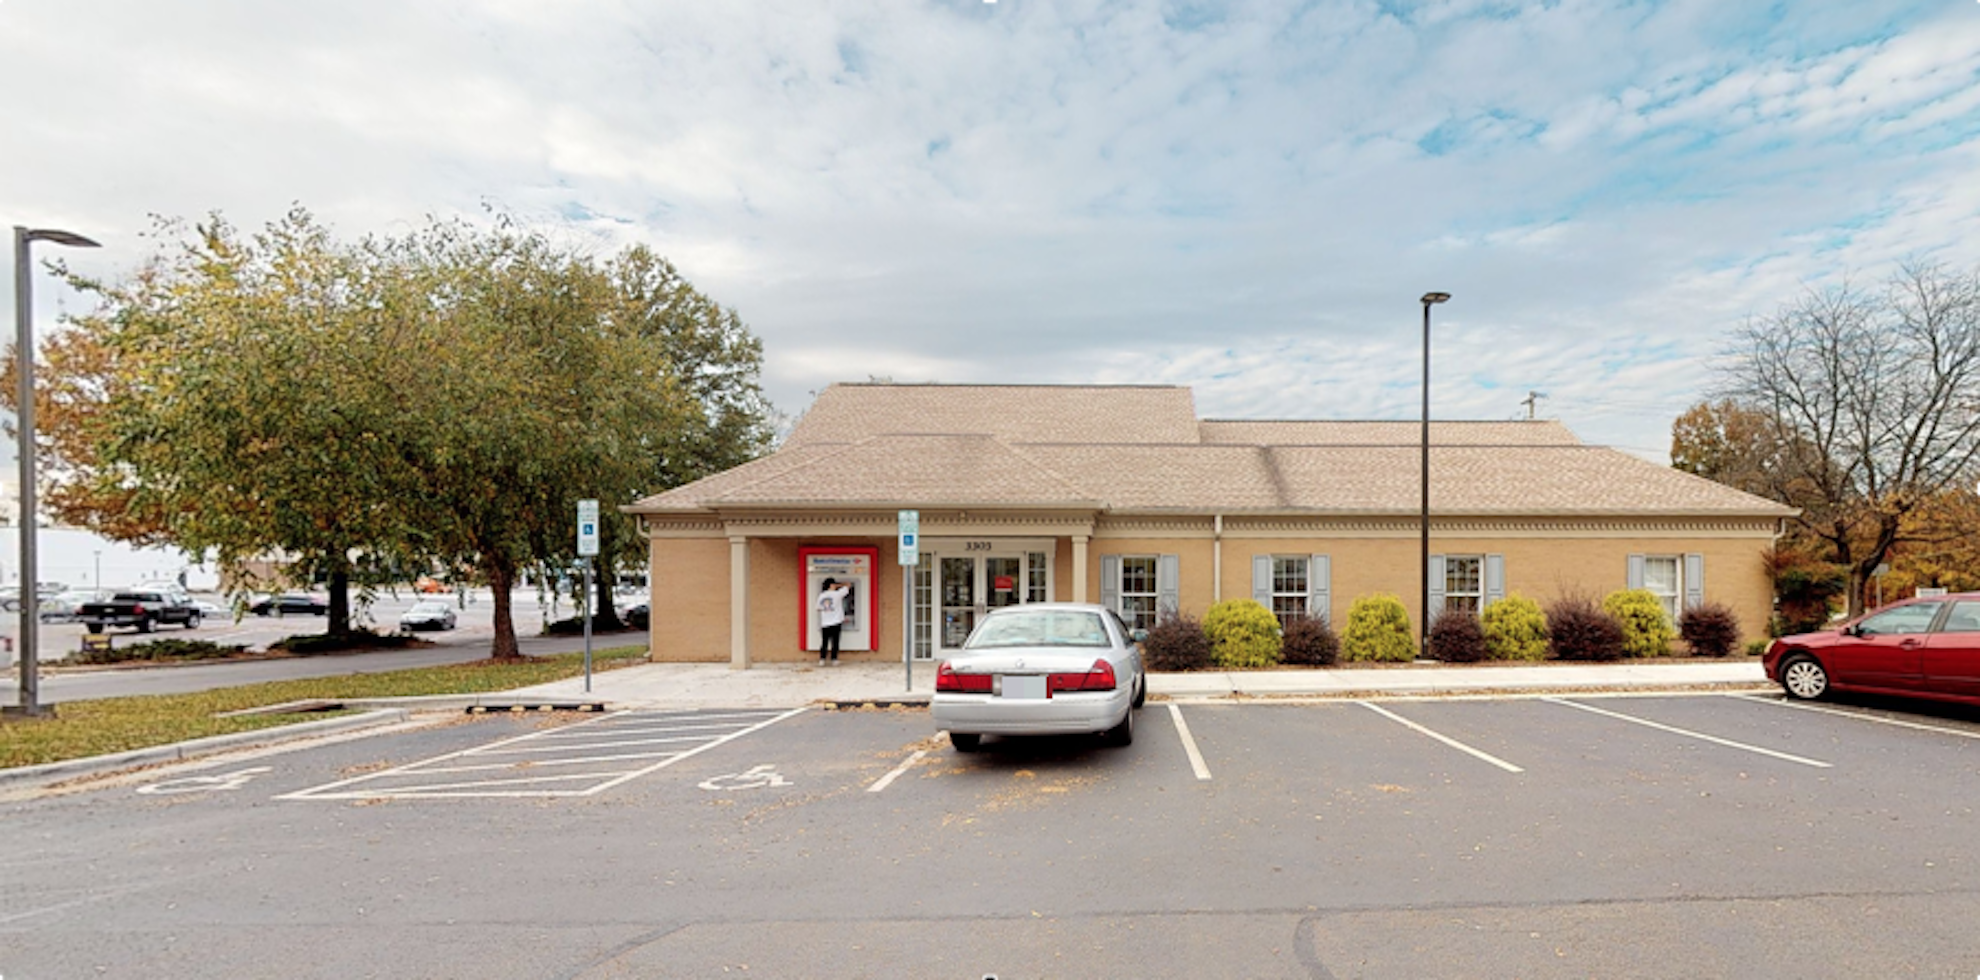 Bank of America financial center with drive-thru ATM and teller | 3303 Battleground Ave, Greensboro, NC 27410